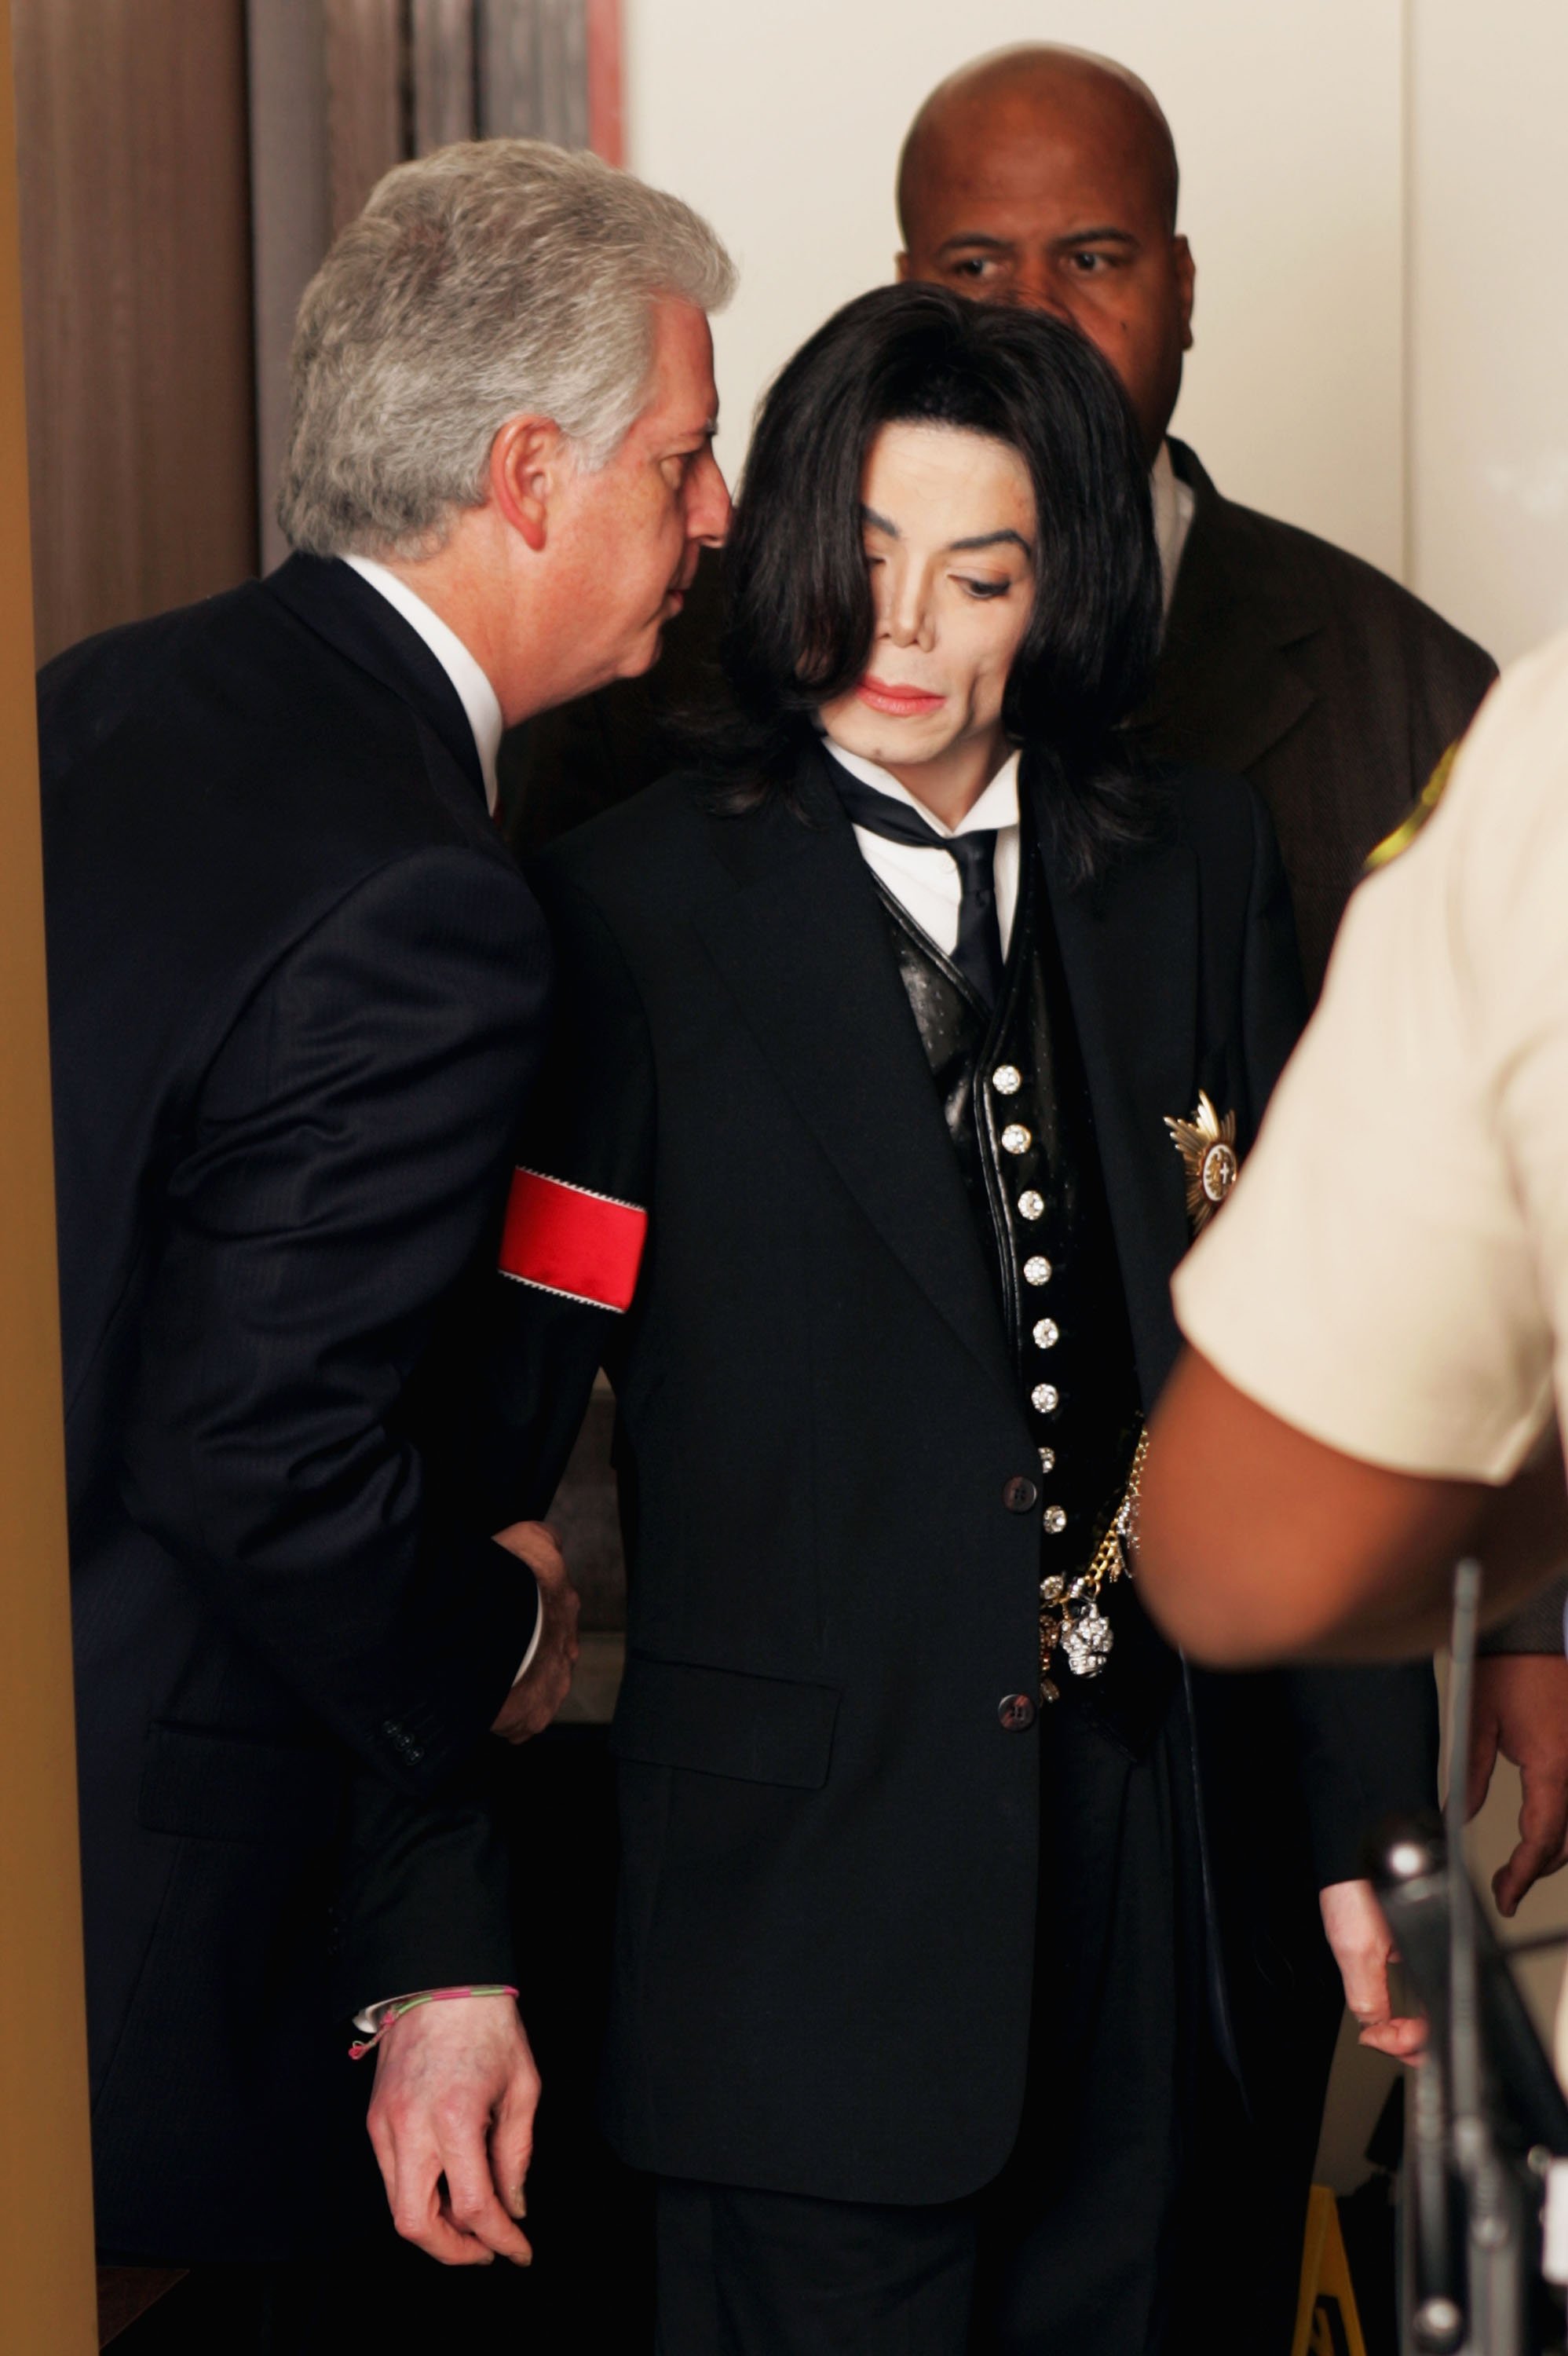 Michael Jackson at the Santa Barbara County Courthouse, in Santa Maria, California, for his child molestation's trial in 2005 | Photo: Getty Images